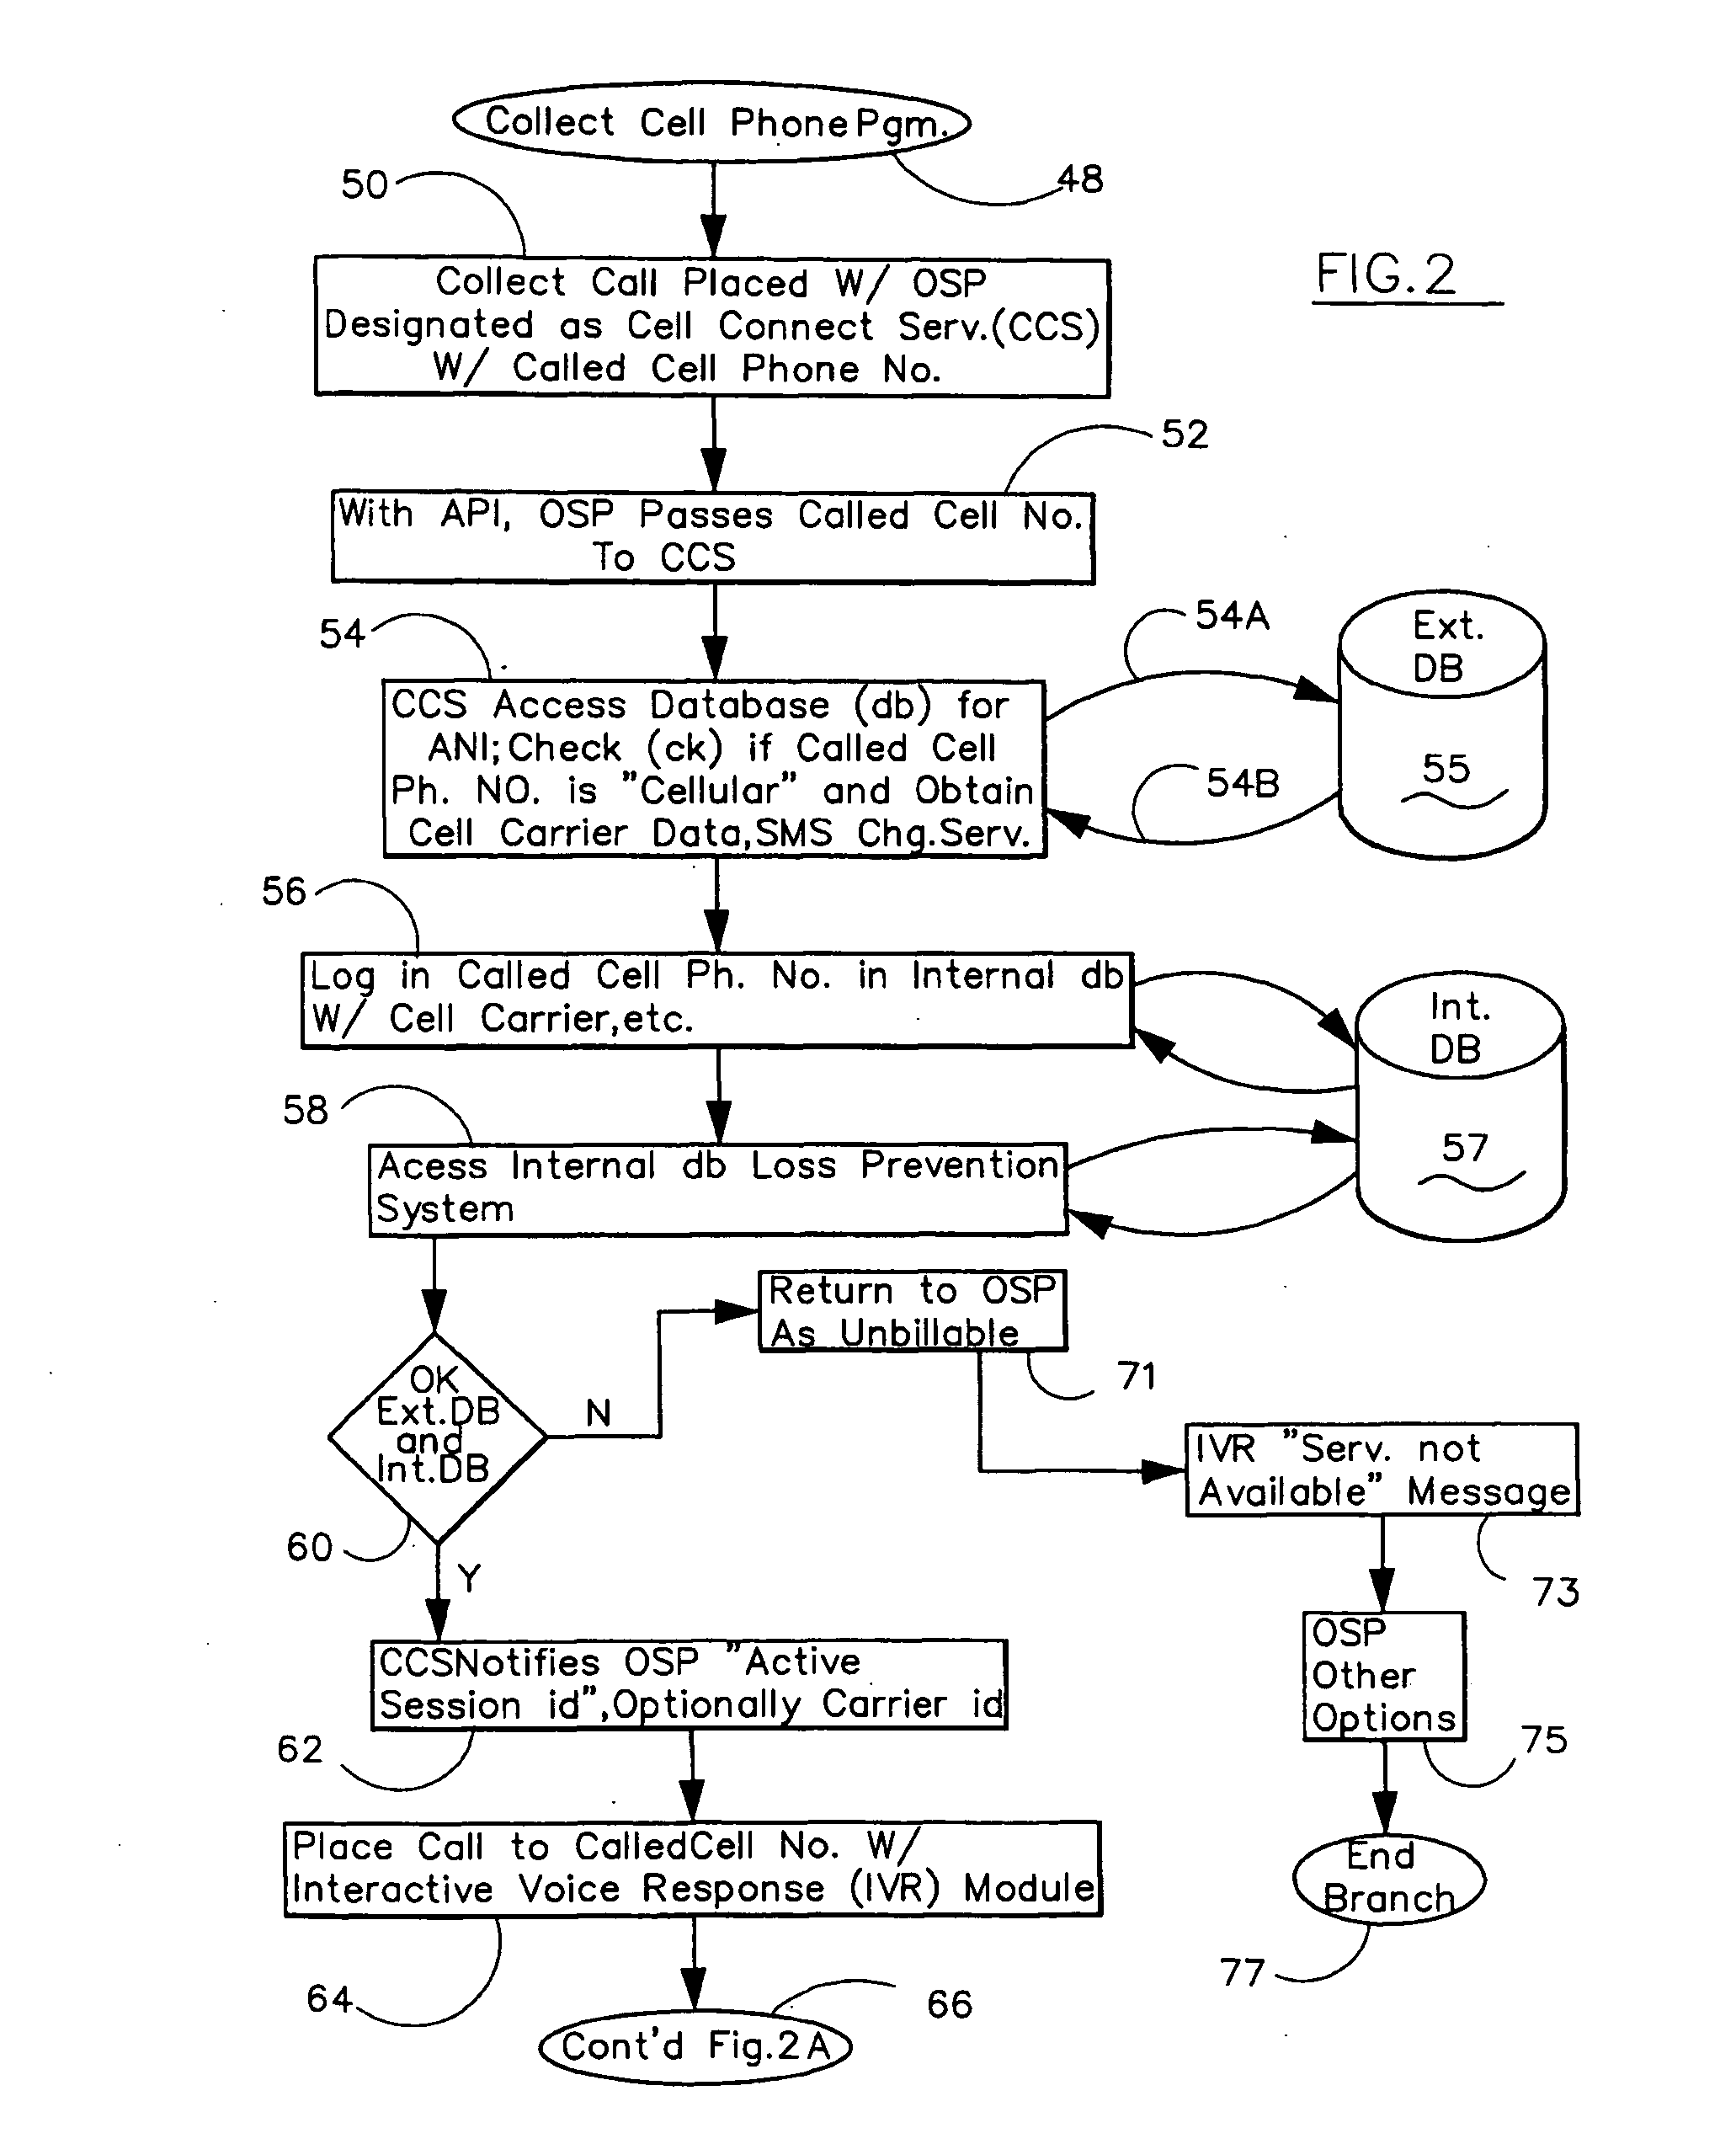 System and Method for Authorizing and Monetizing Collect Cellular Telephone Calls